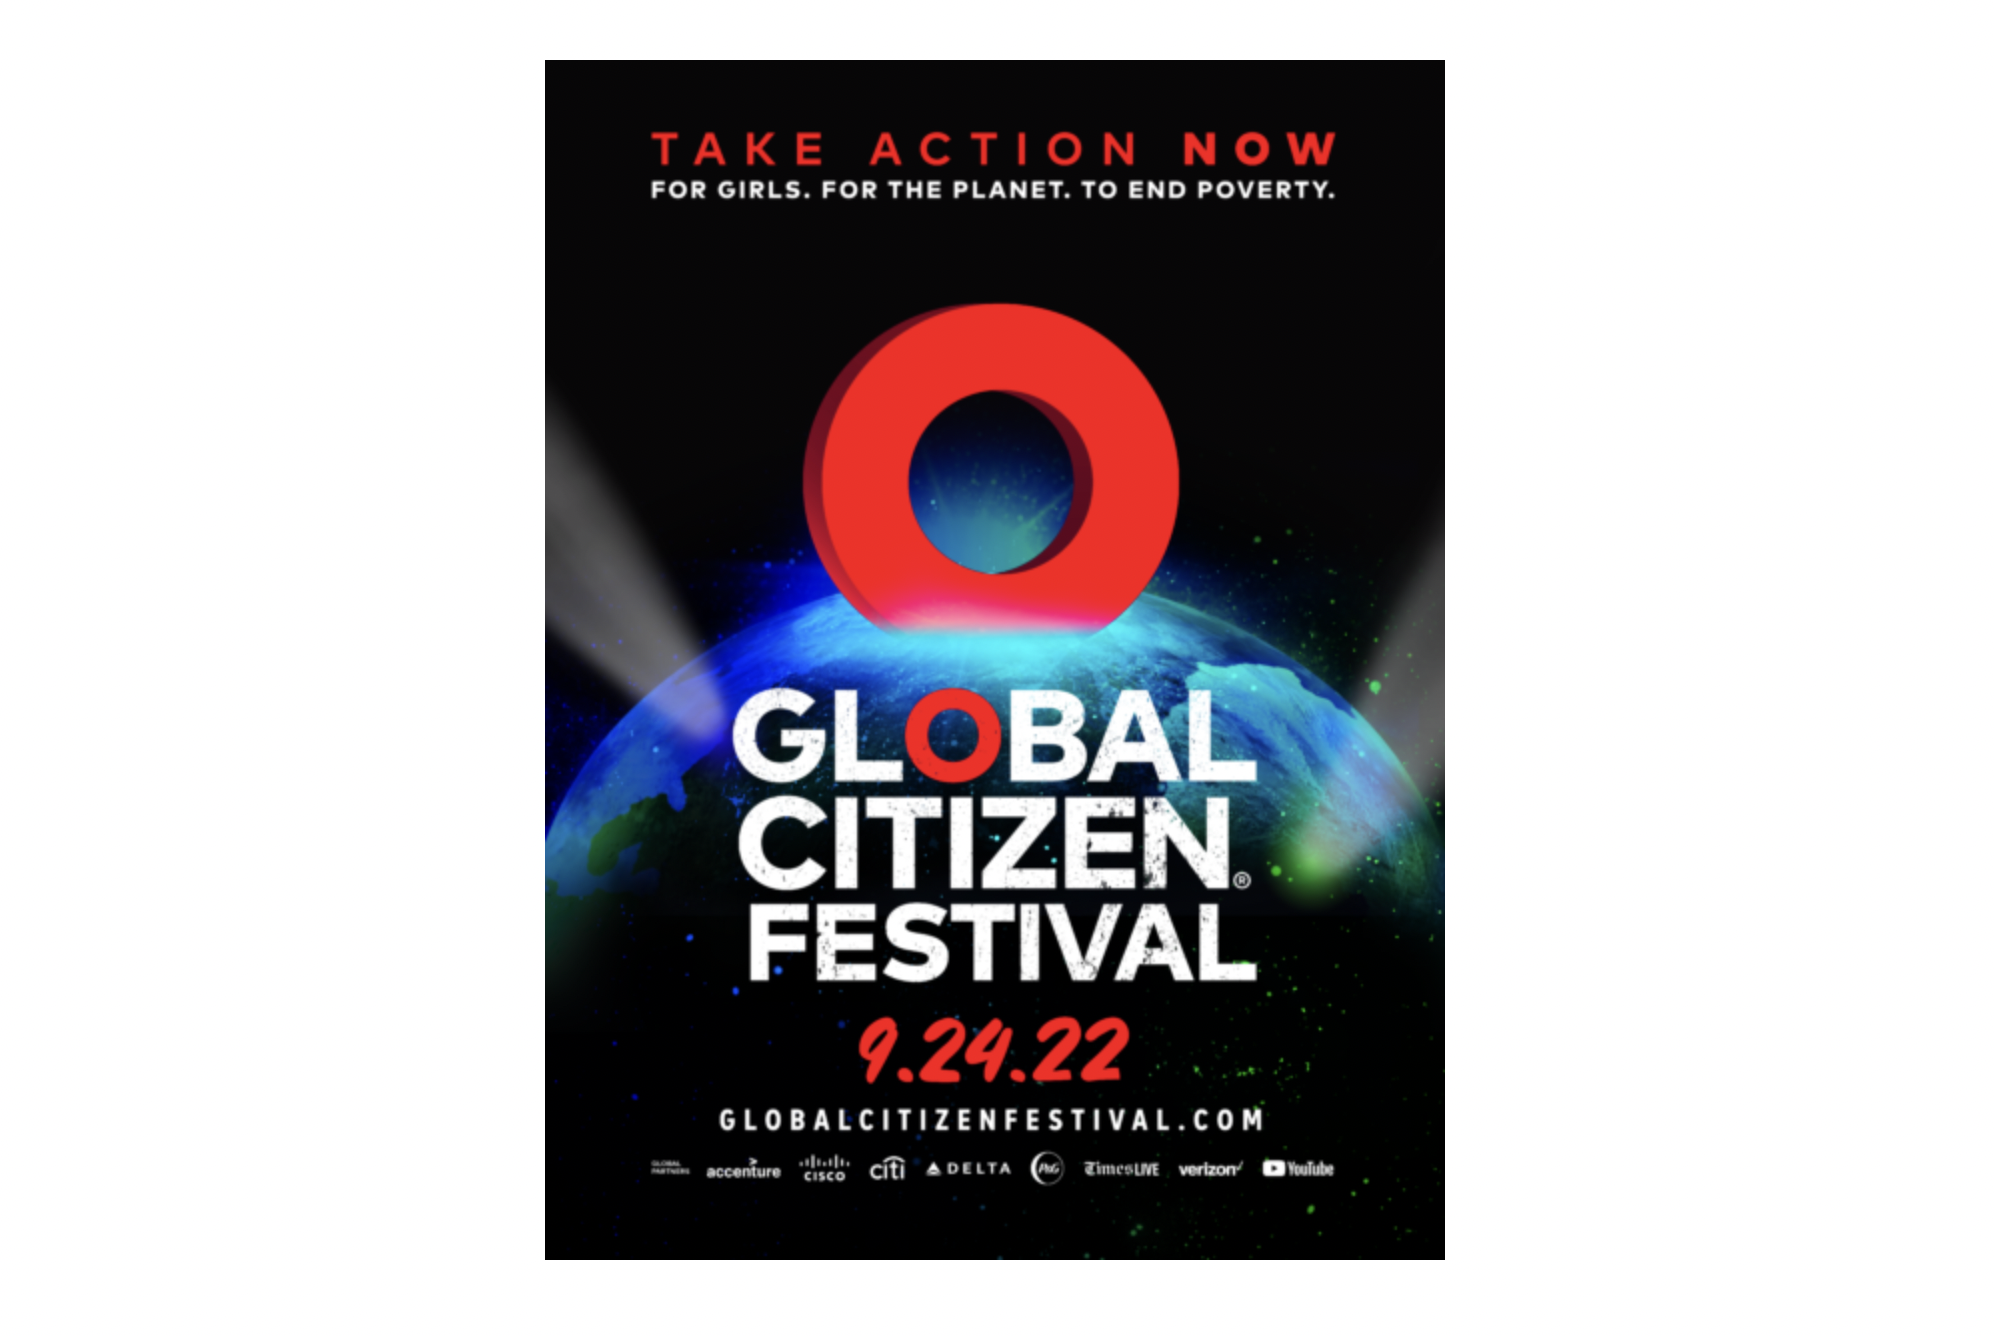 Global Citizen Announces LineUp for 2022 'Global Citizen Festival' in